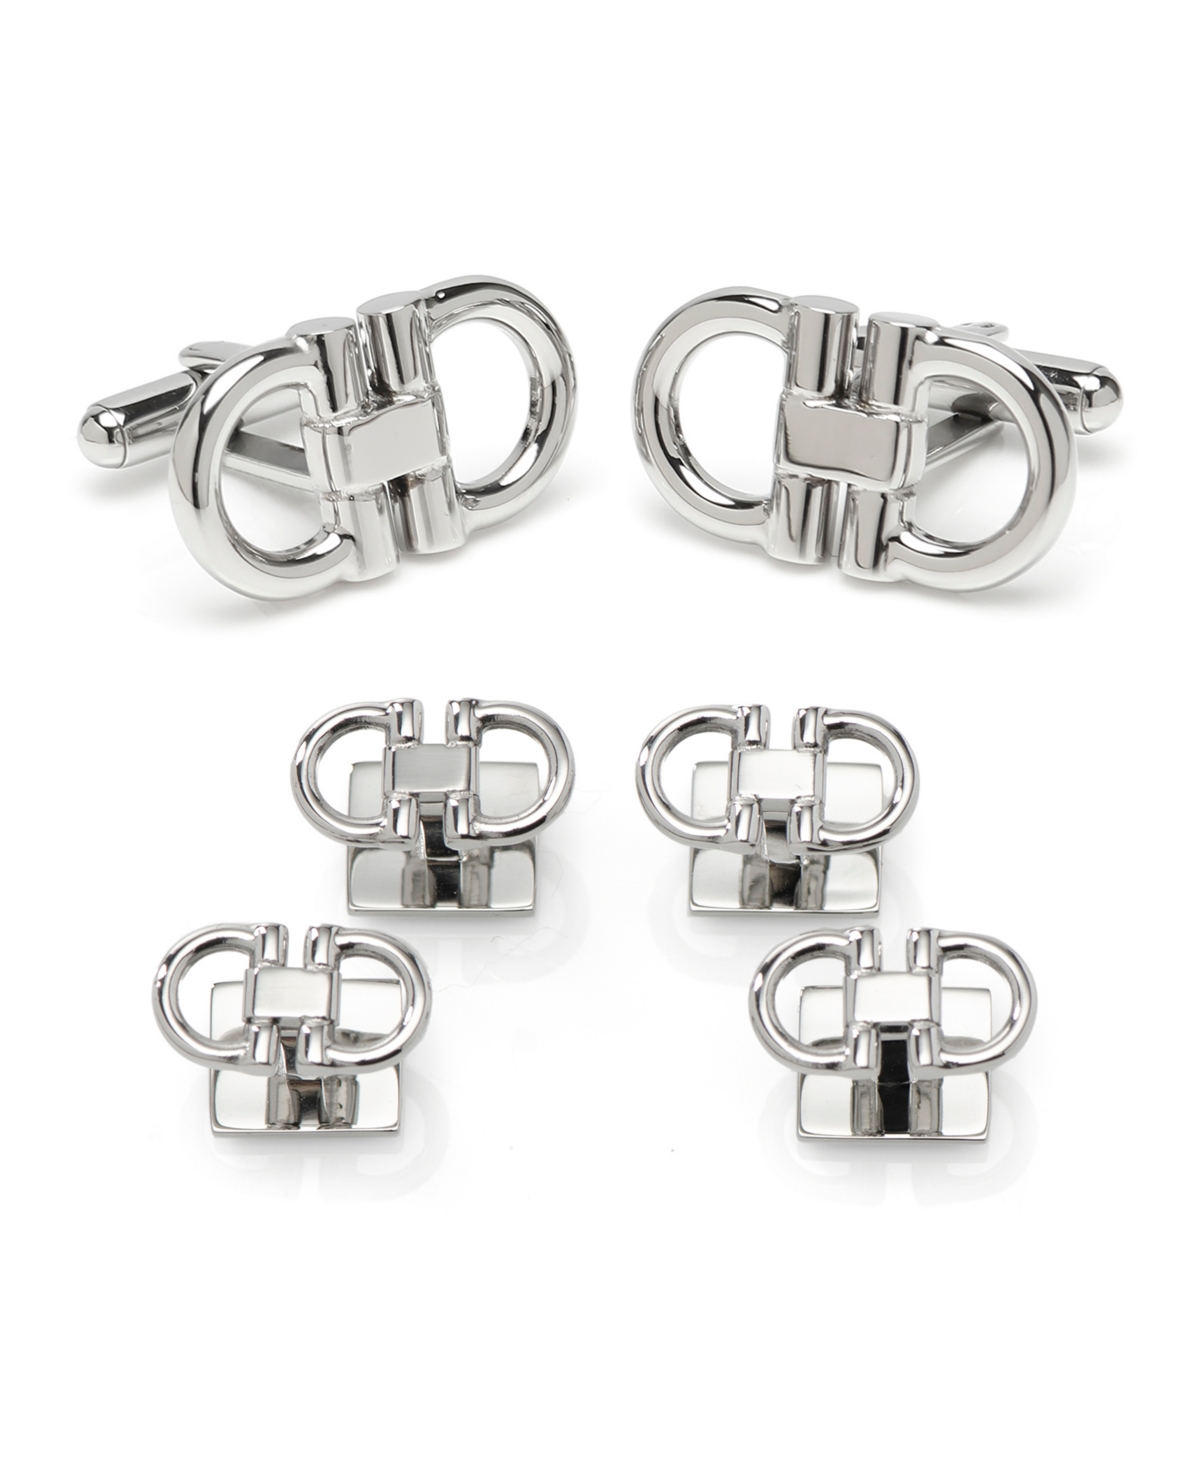 Ox & Bull Trading Co. Men's Horse Bit Stainless Steel Cufflinks And Stud Set, 6 Piece Set In Silver